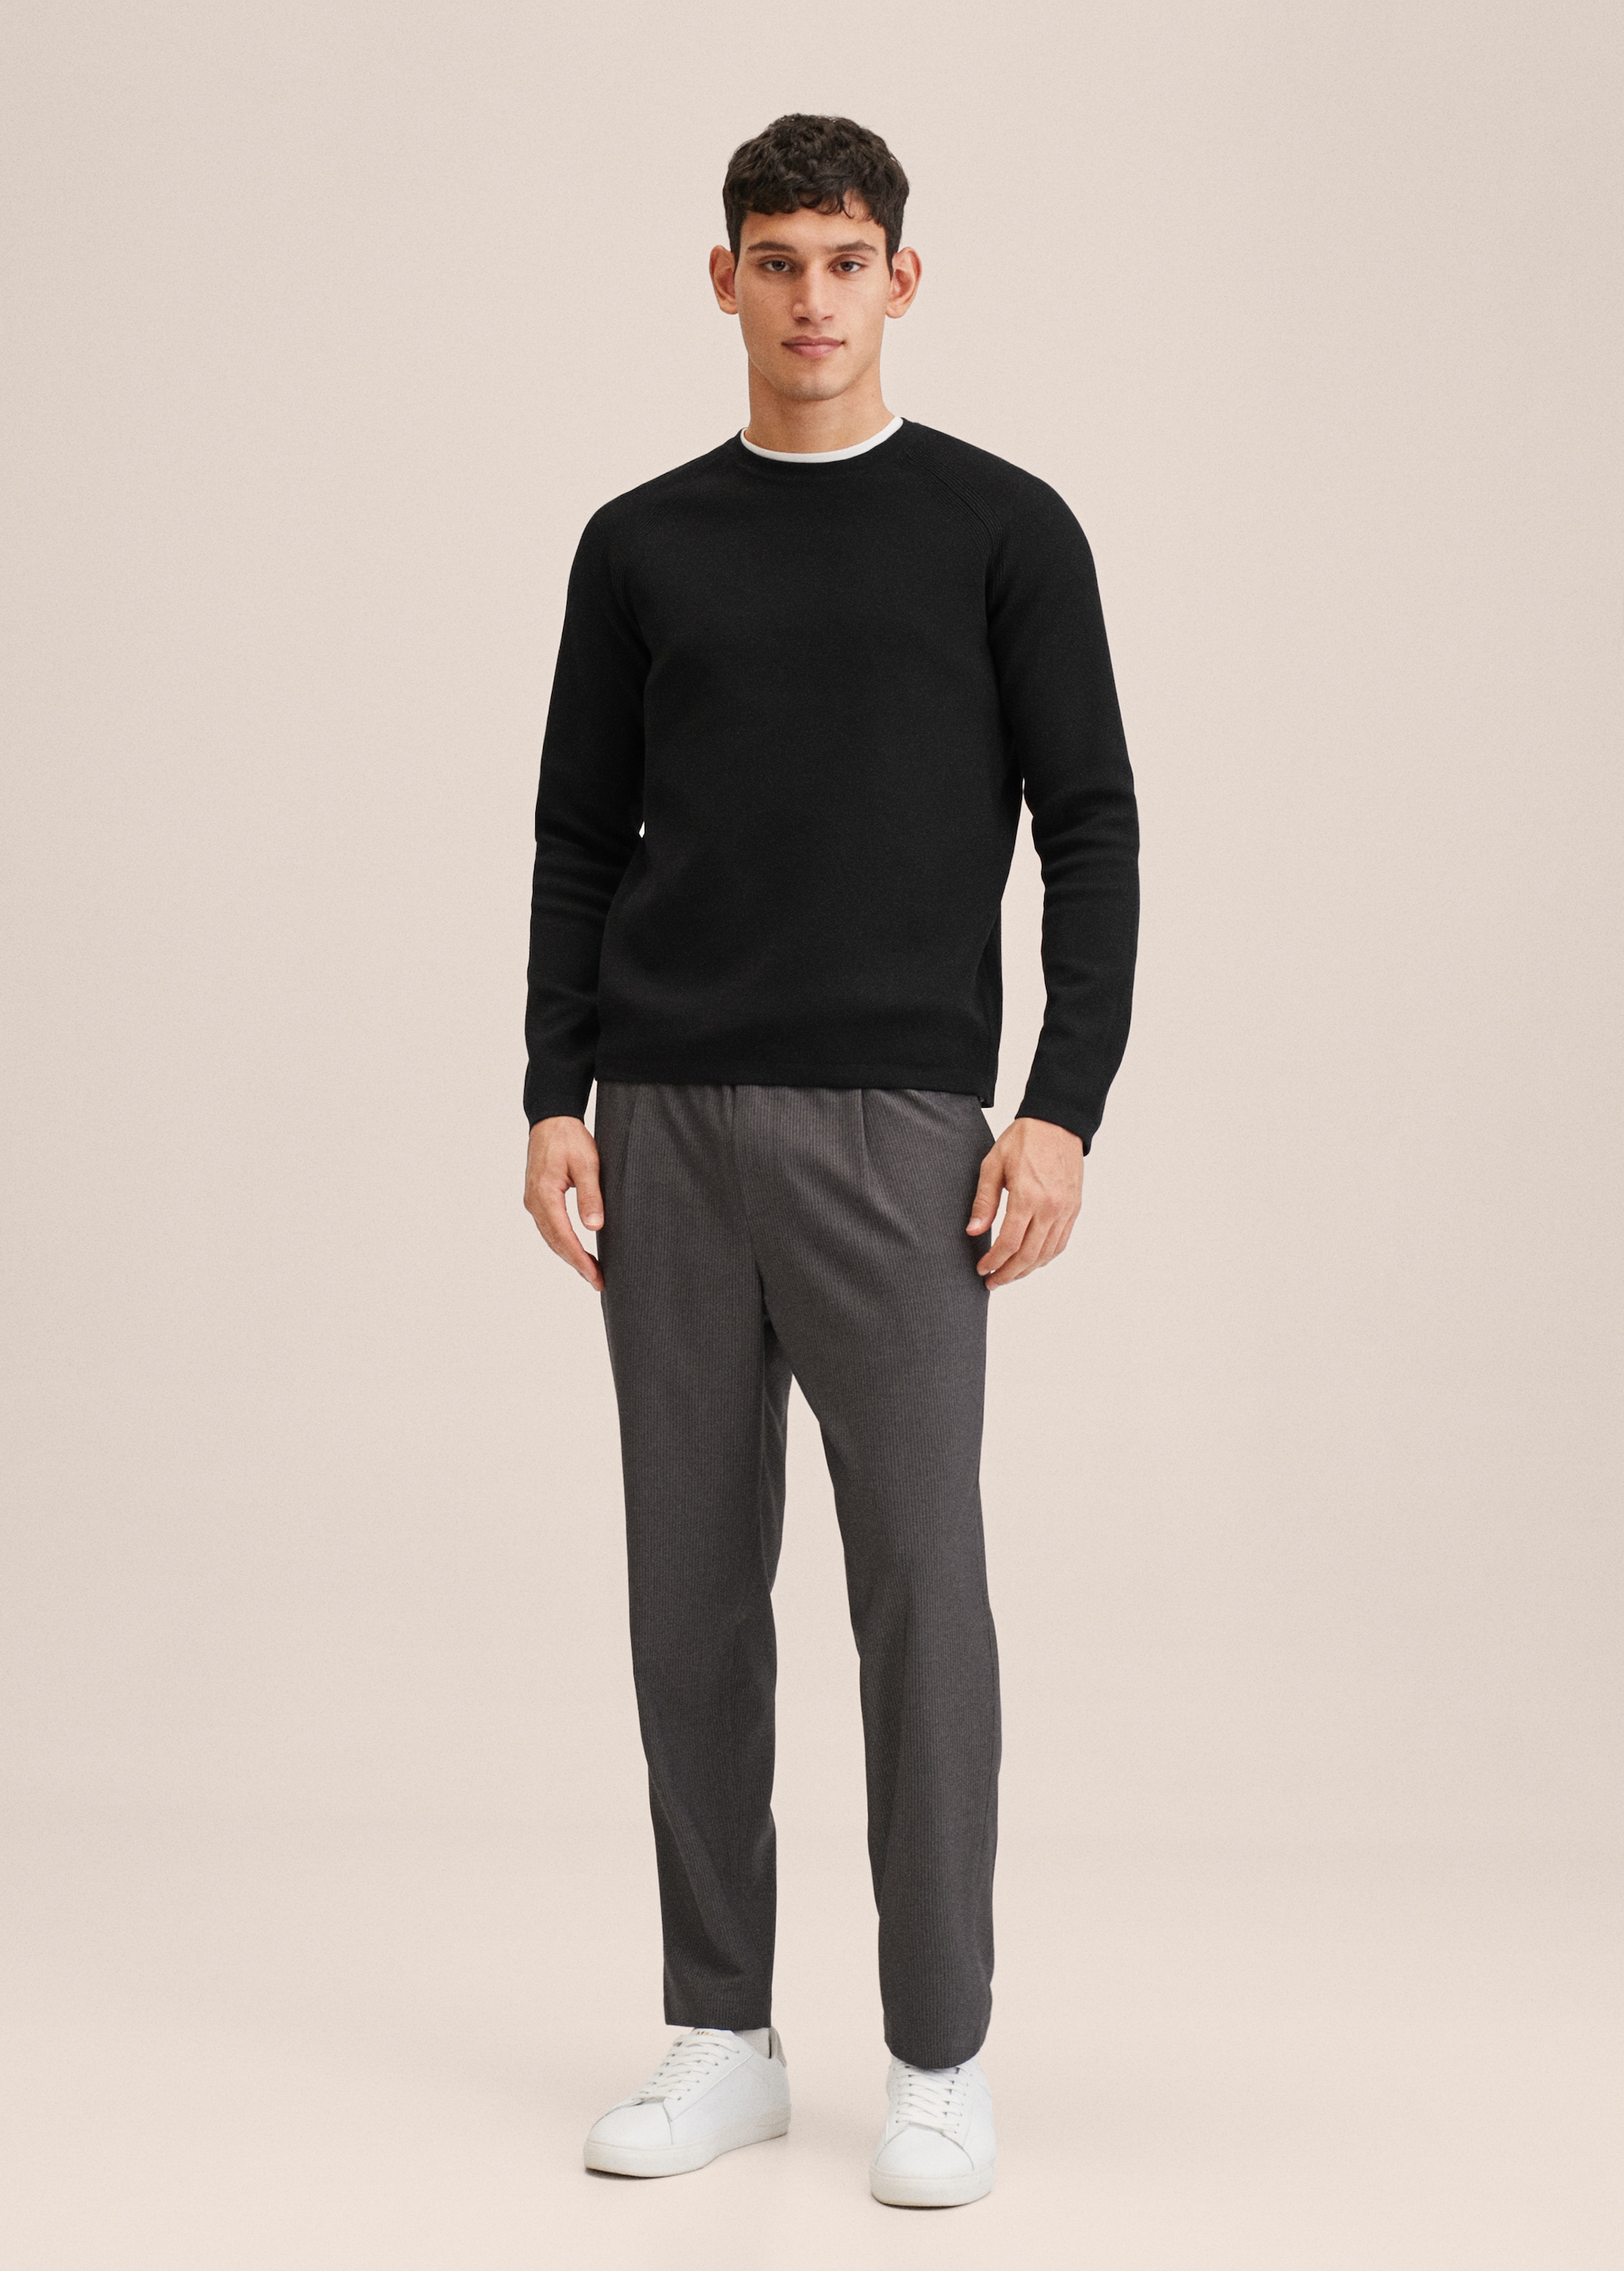 Crease-resistant stretch sweater - General plane